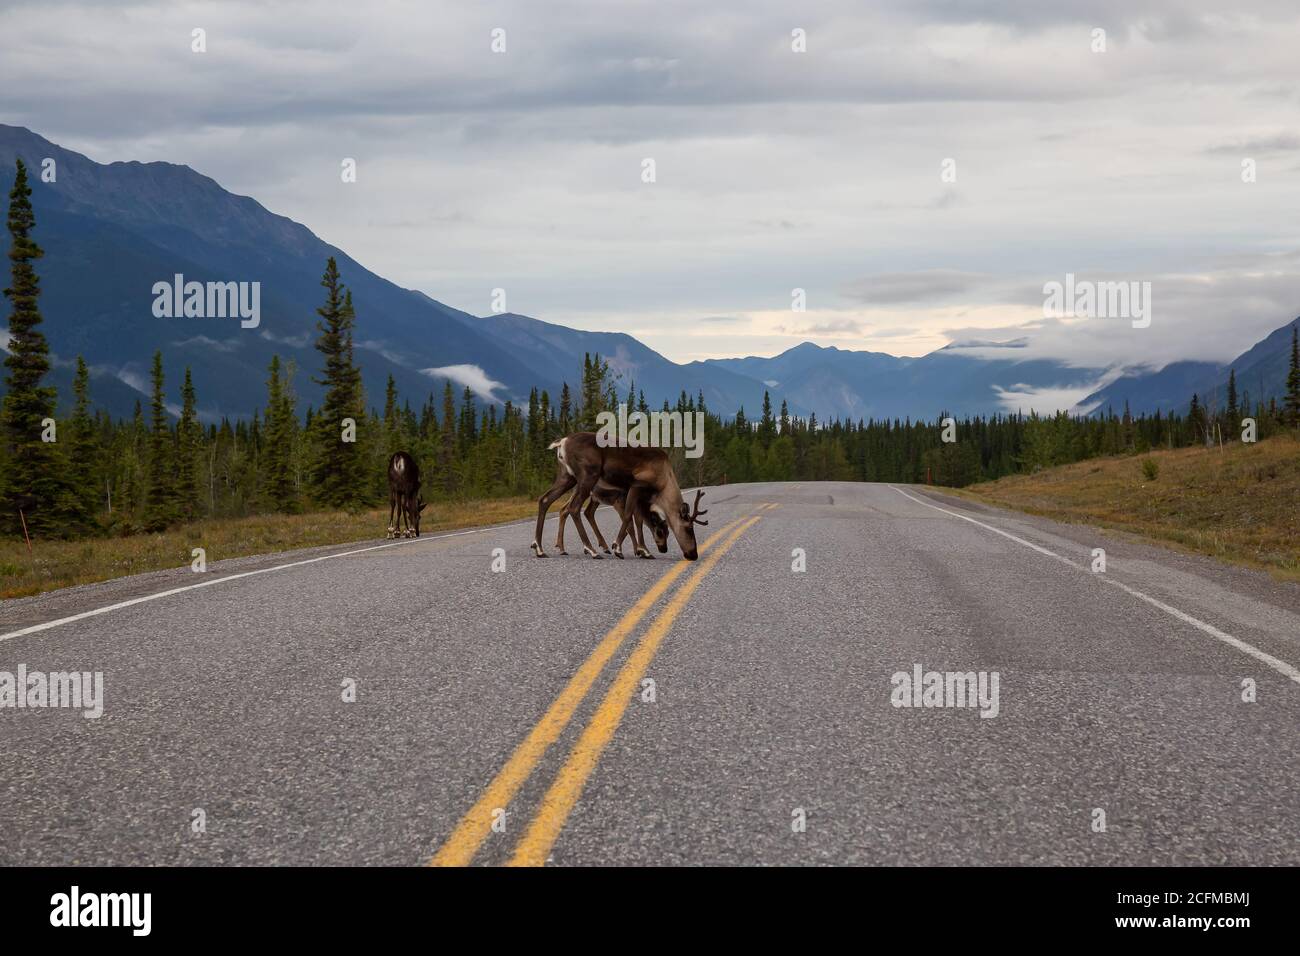 Cariboo family walking on a scenic road during a cloudy morning sunrise. Stock Photo